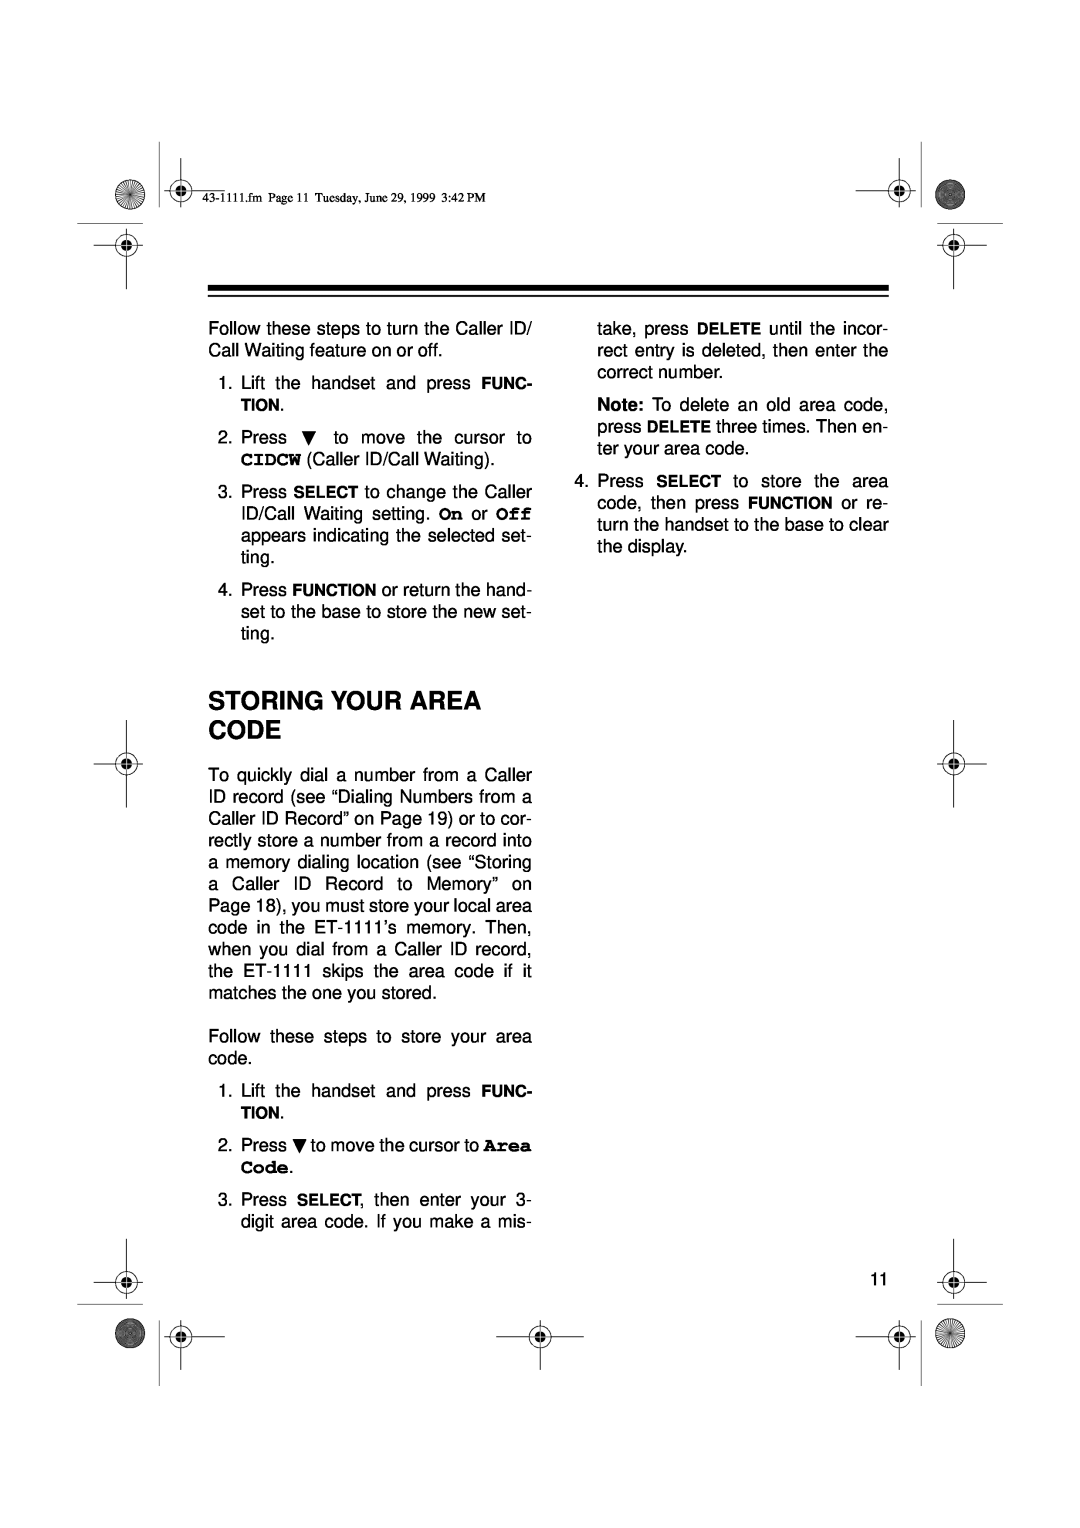 Radio Shack ET-1111 owner manual Storing Your Area Code 